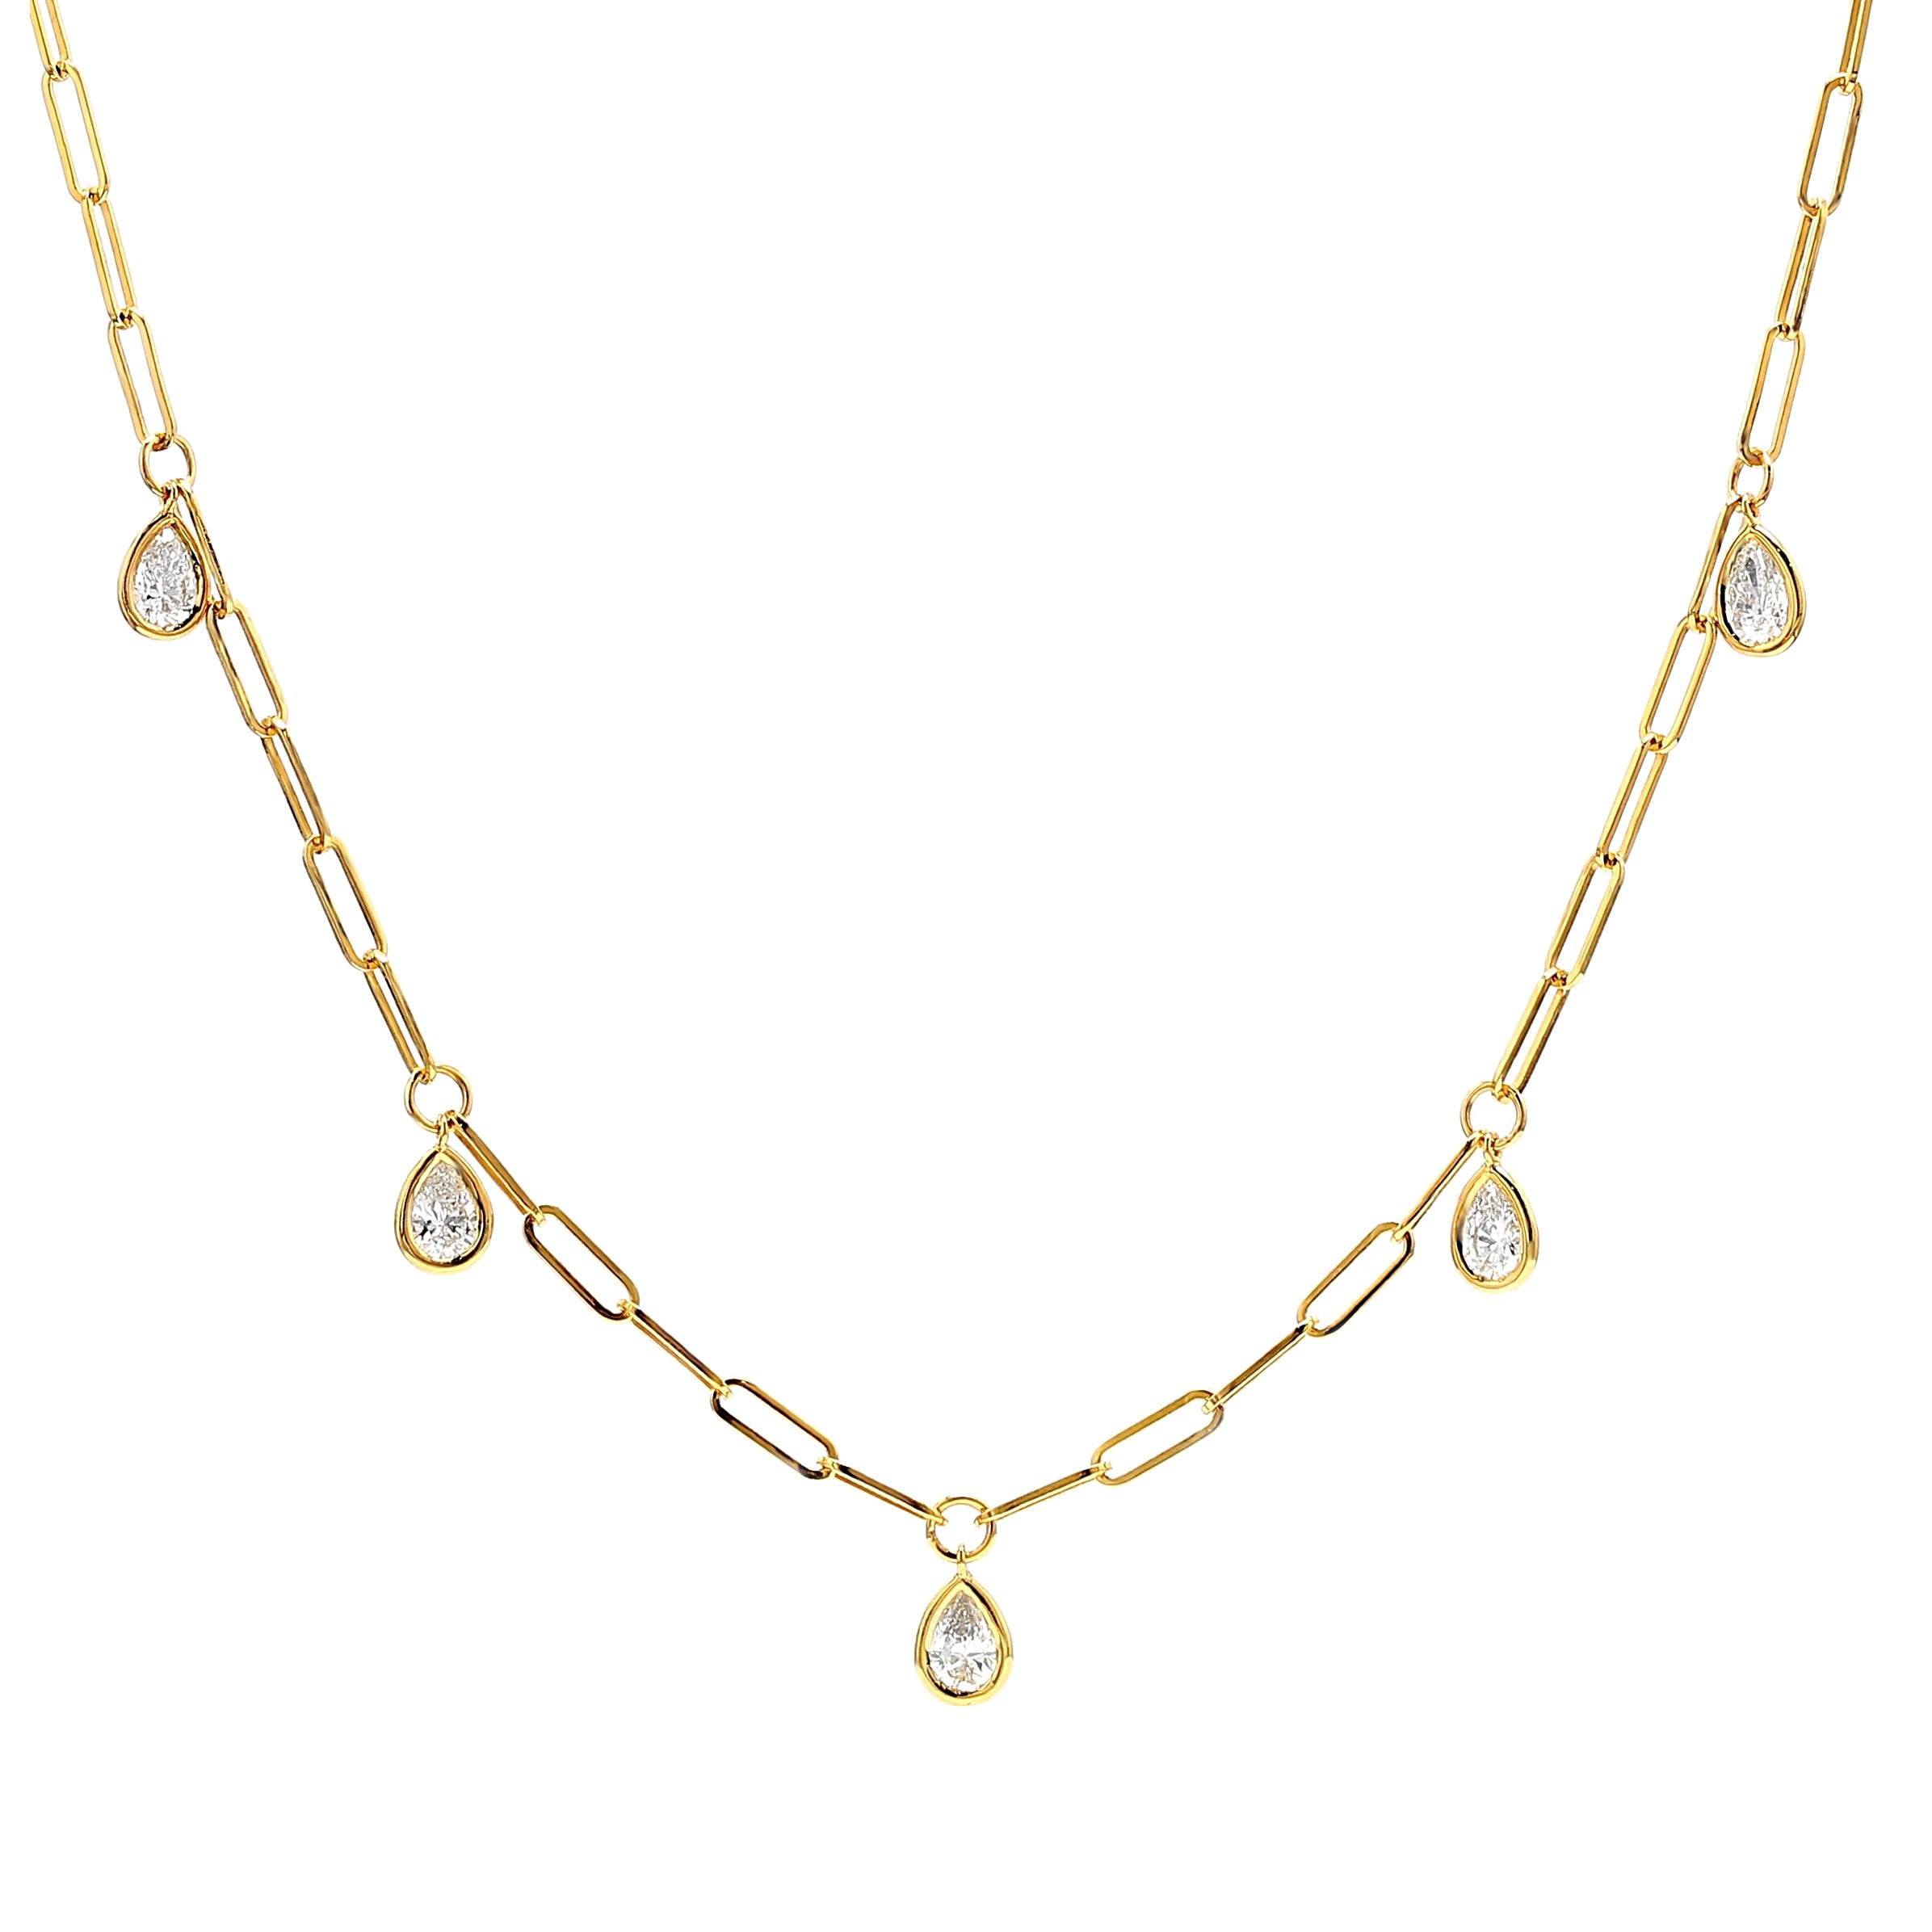 Shimansky - Diamonds By the Yard Drop Necklace crafted in 14K Yellow Gold